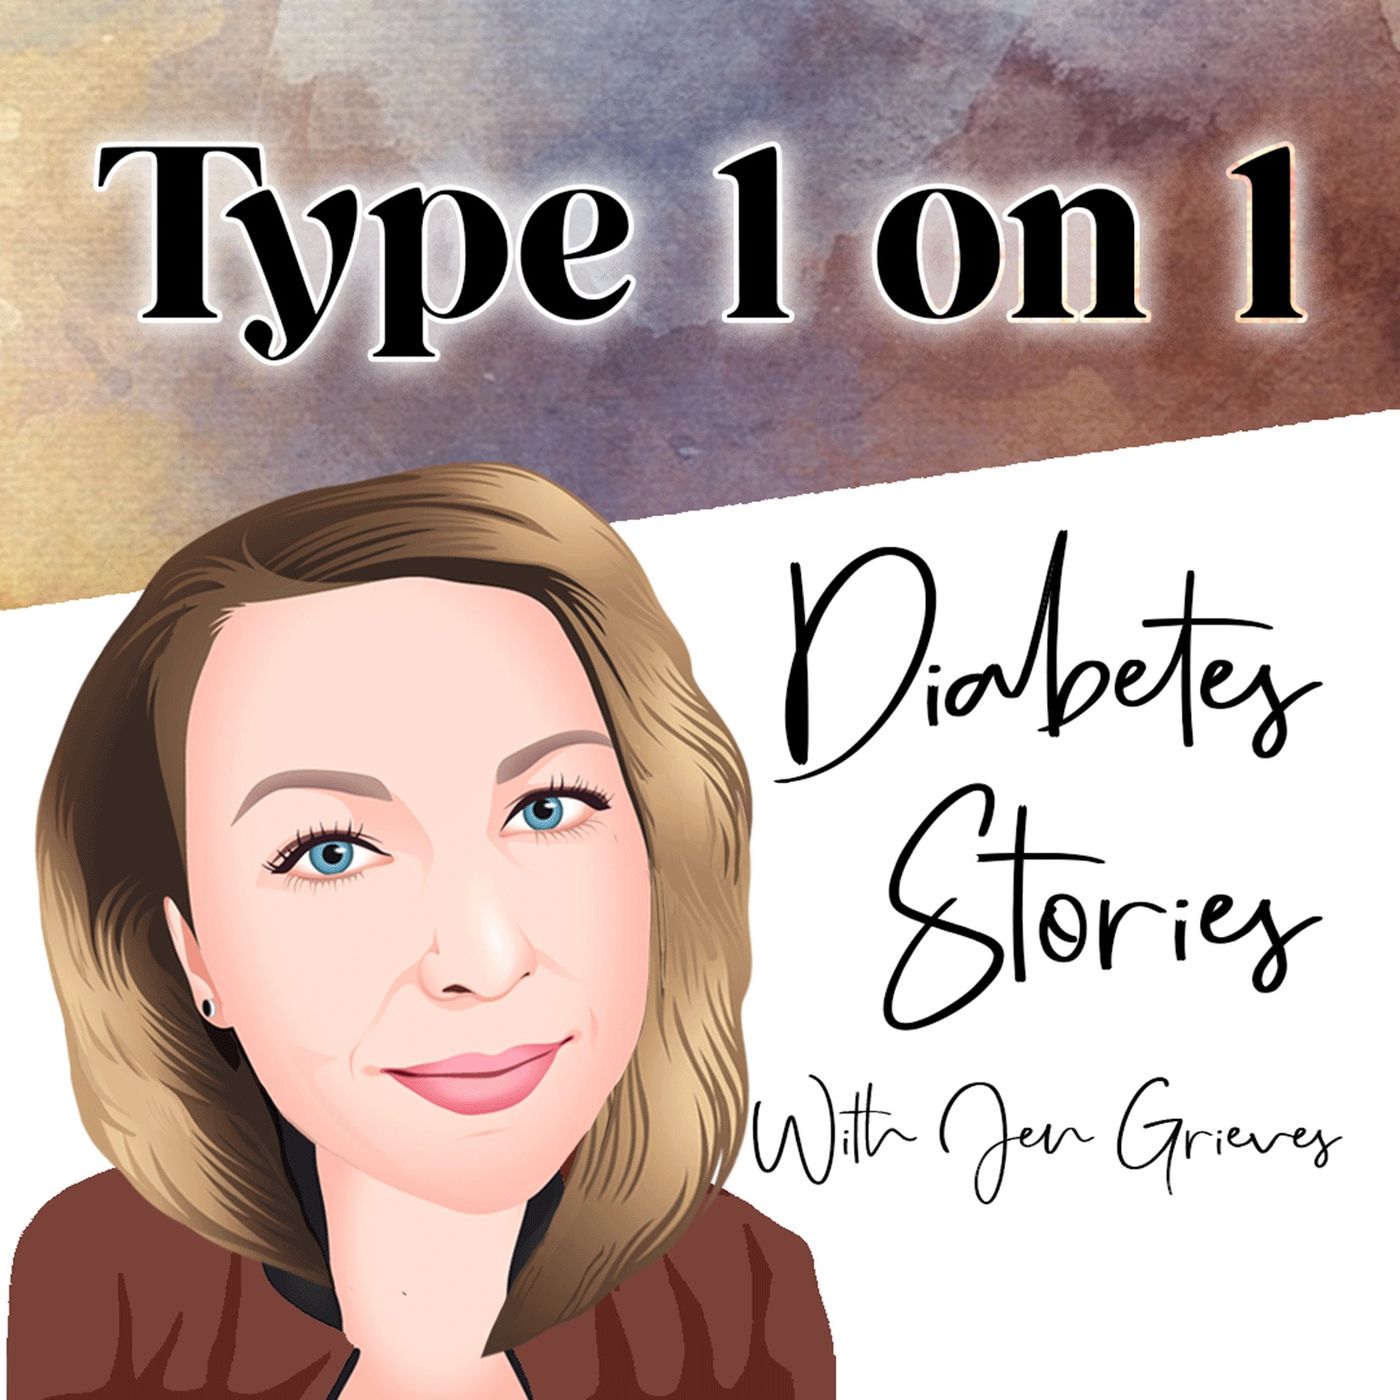 The psychology of food and type 1 diabetes with nutritional therapist Beth Edwards